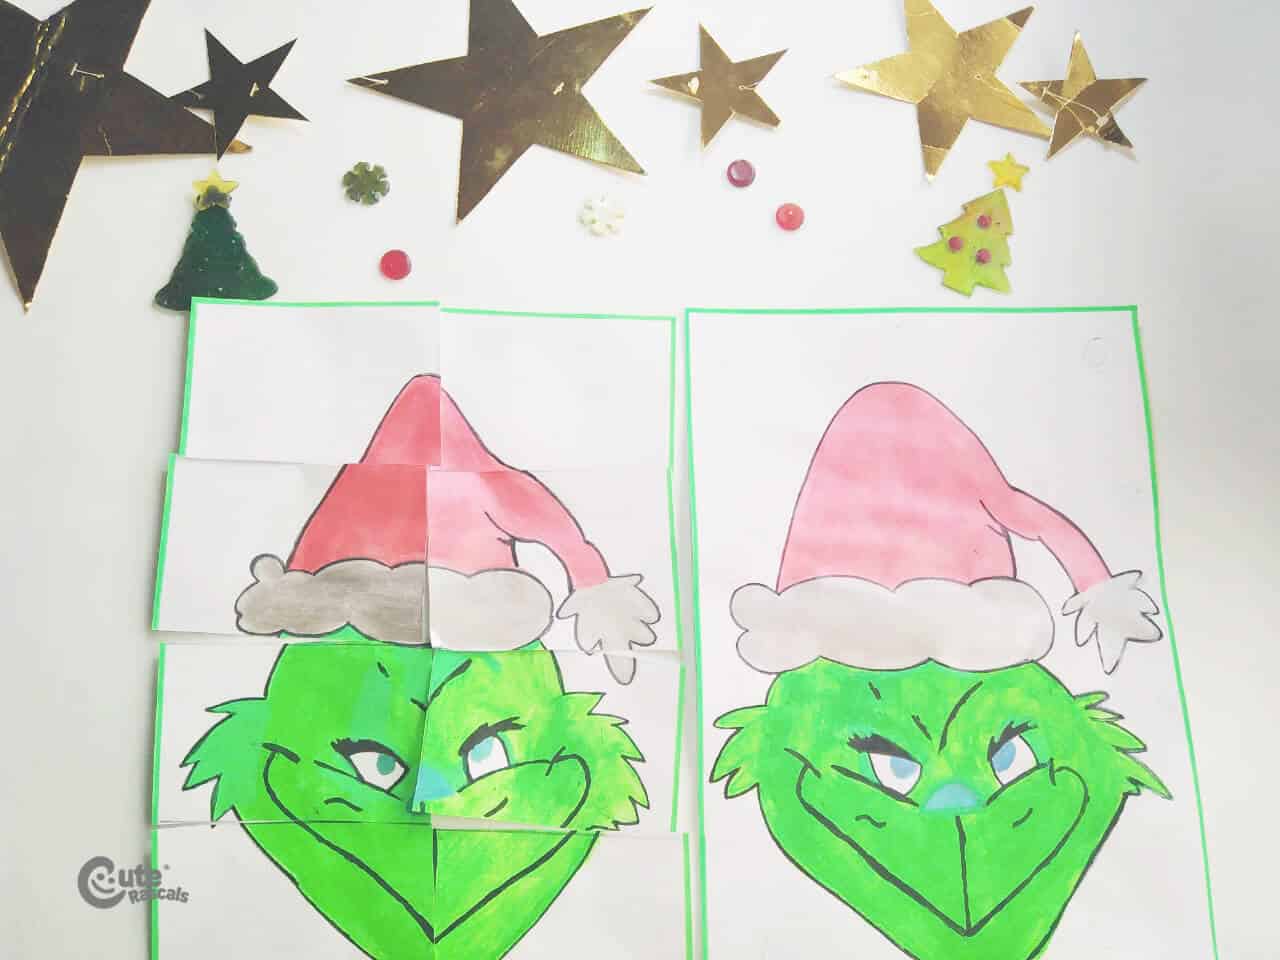 Grinch's jigsaw puzzle activity